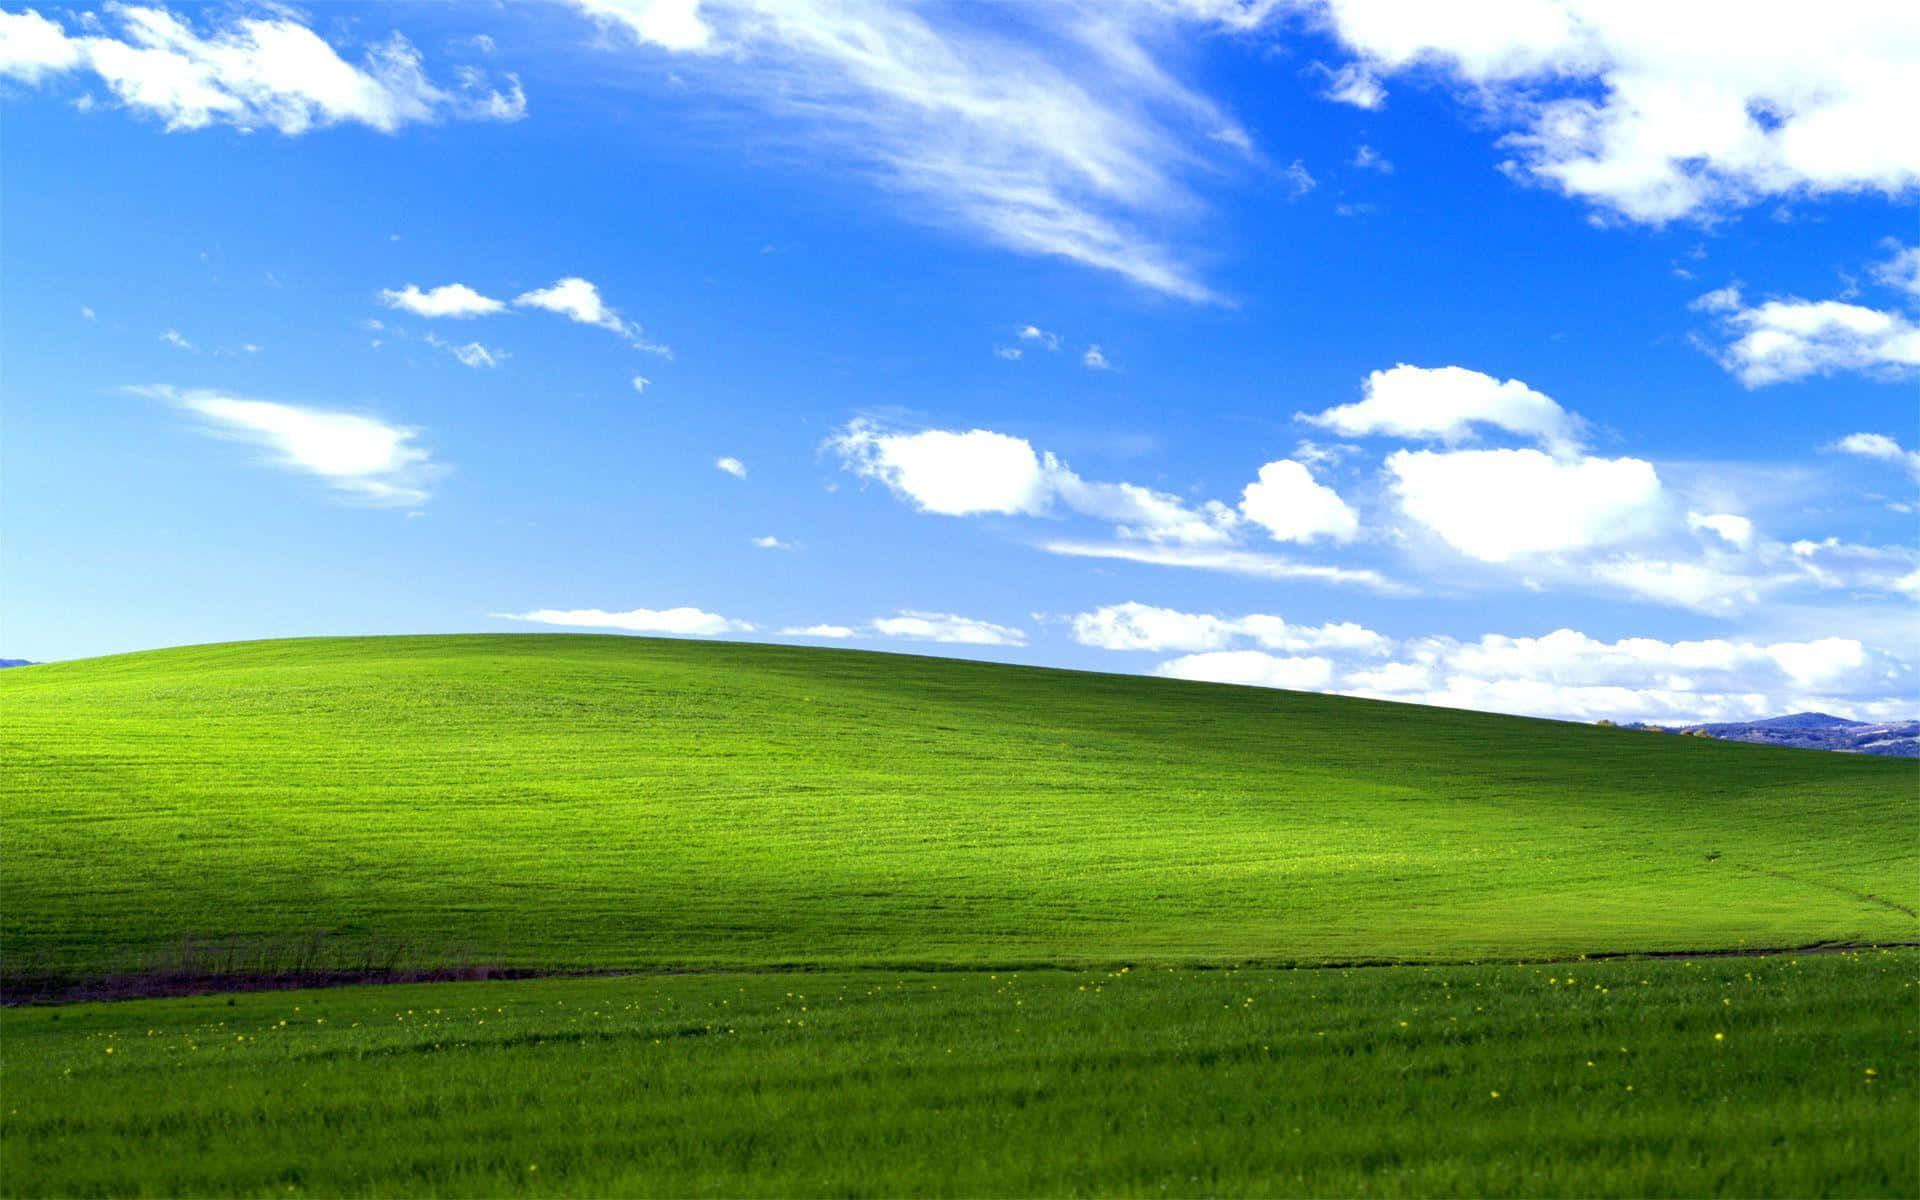 A Green Field With A Hill